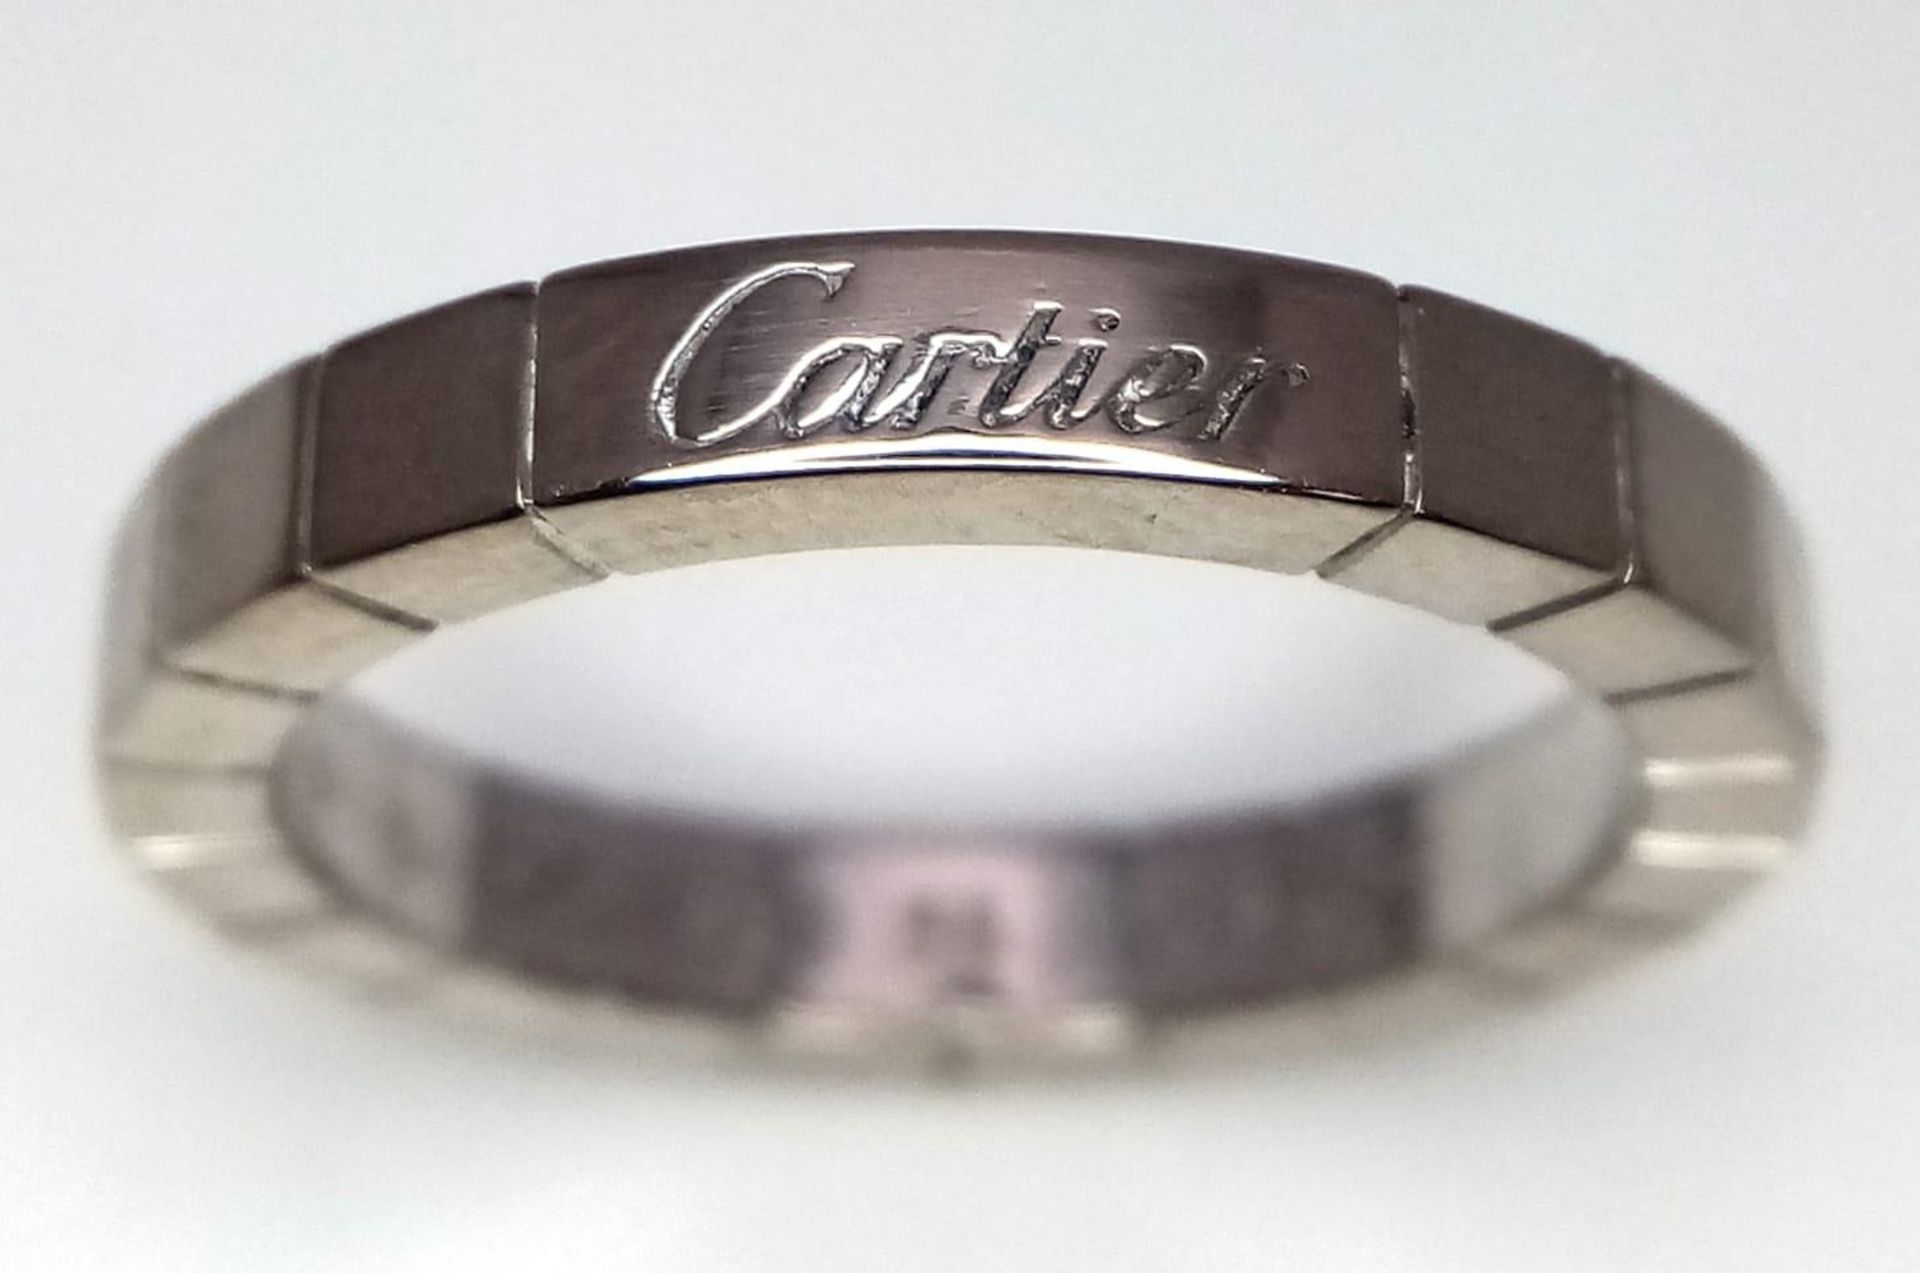 A vintage, 19 K white gold CARTIER band ring, fully hallmarked, size: O, weight: 6.7 g, in its